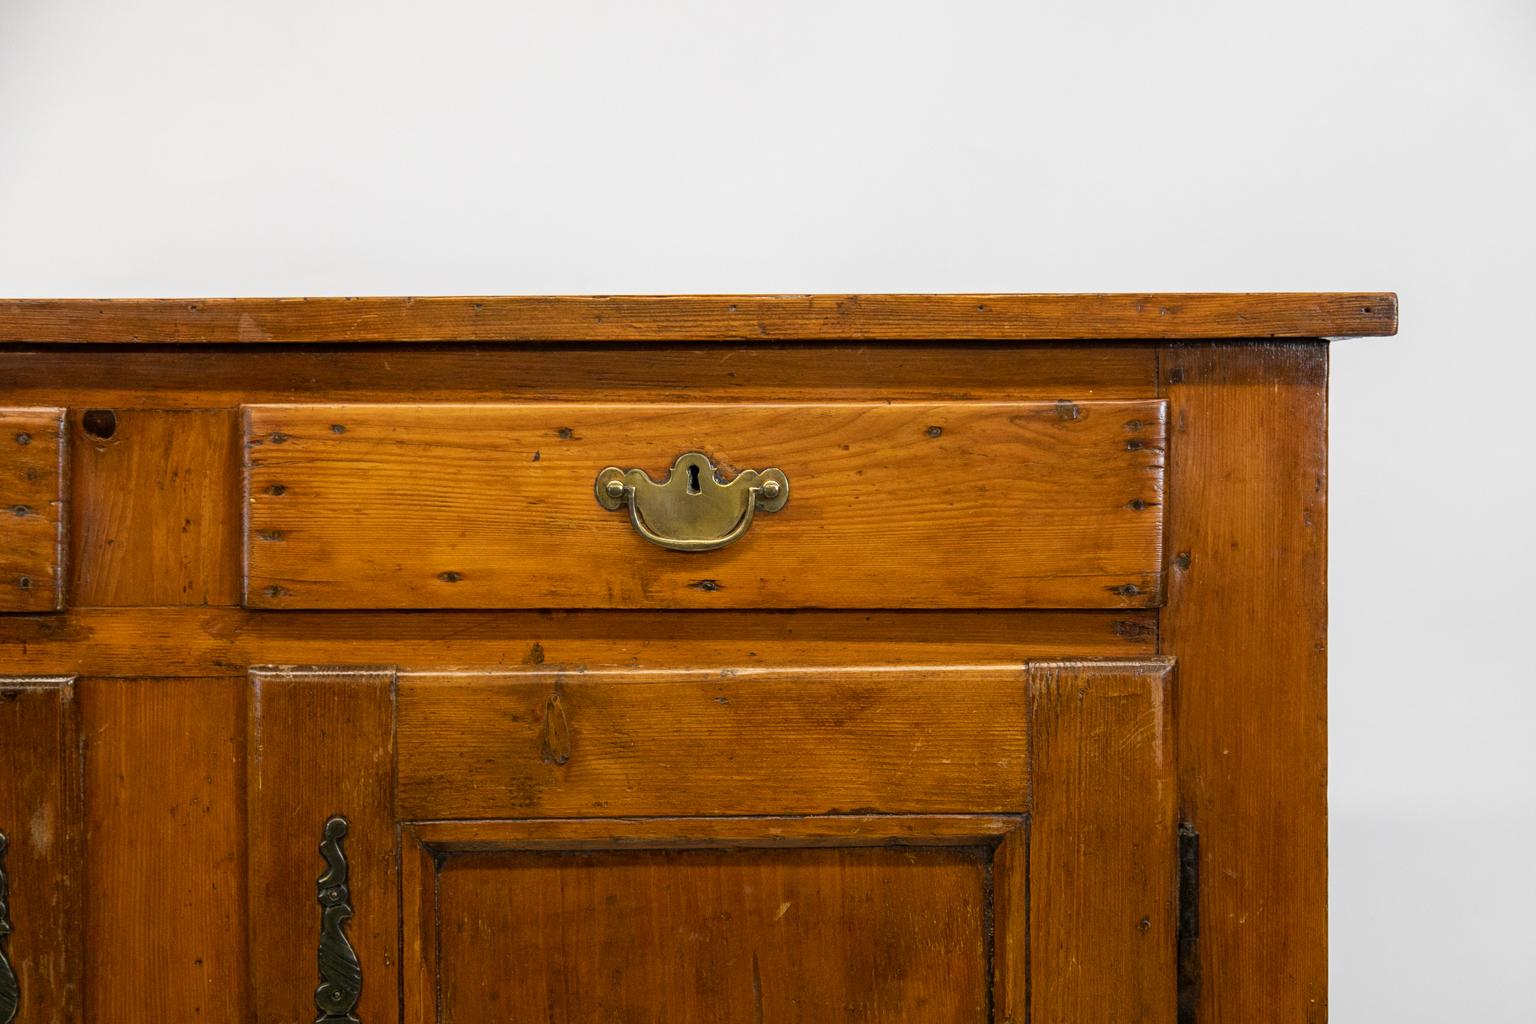 French pine buffet, with two drawers over two doors, the doors have recessed panels framed by beveled molding, the sides are both pine and oak. The steel hinges are original, but the brass hardware is later.